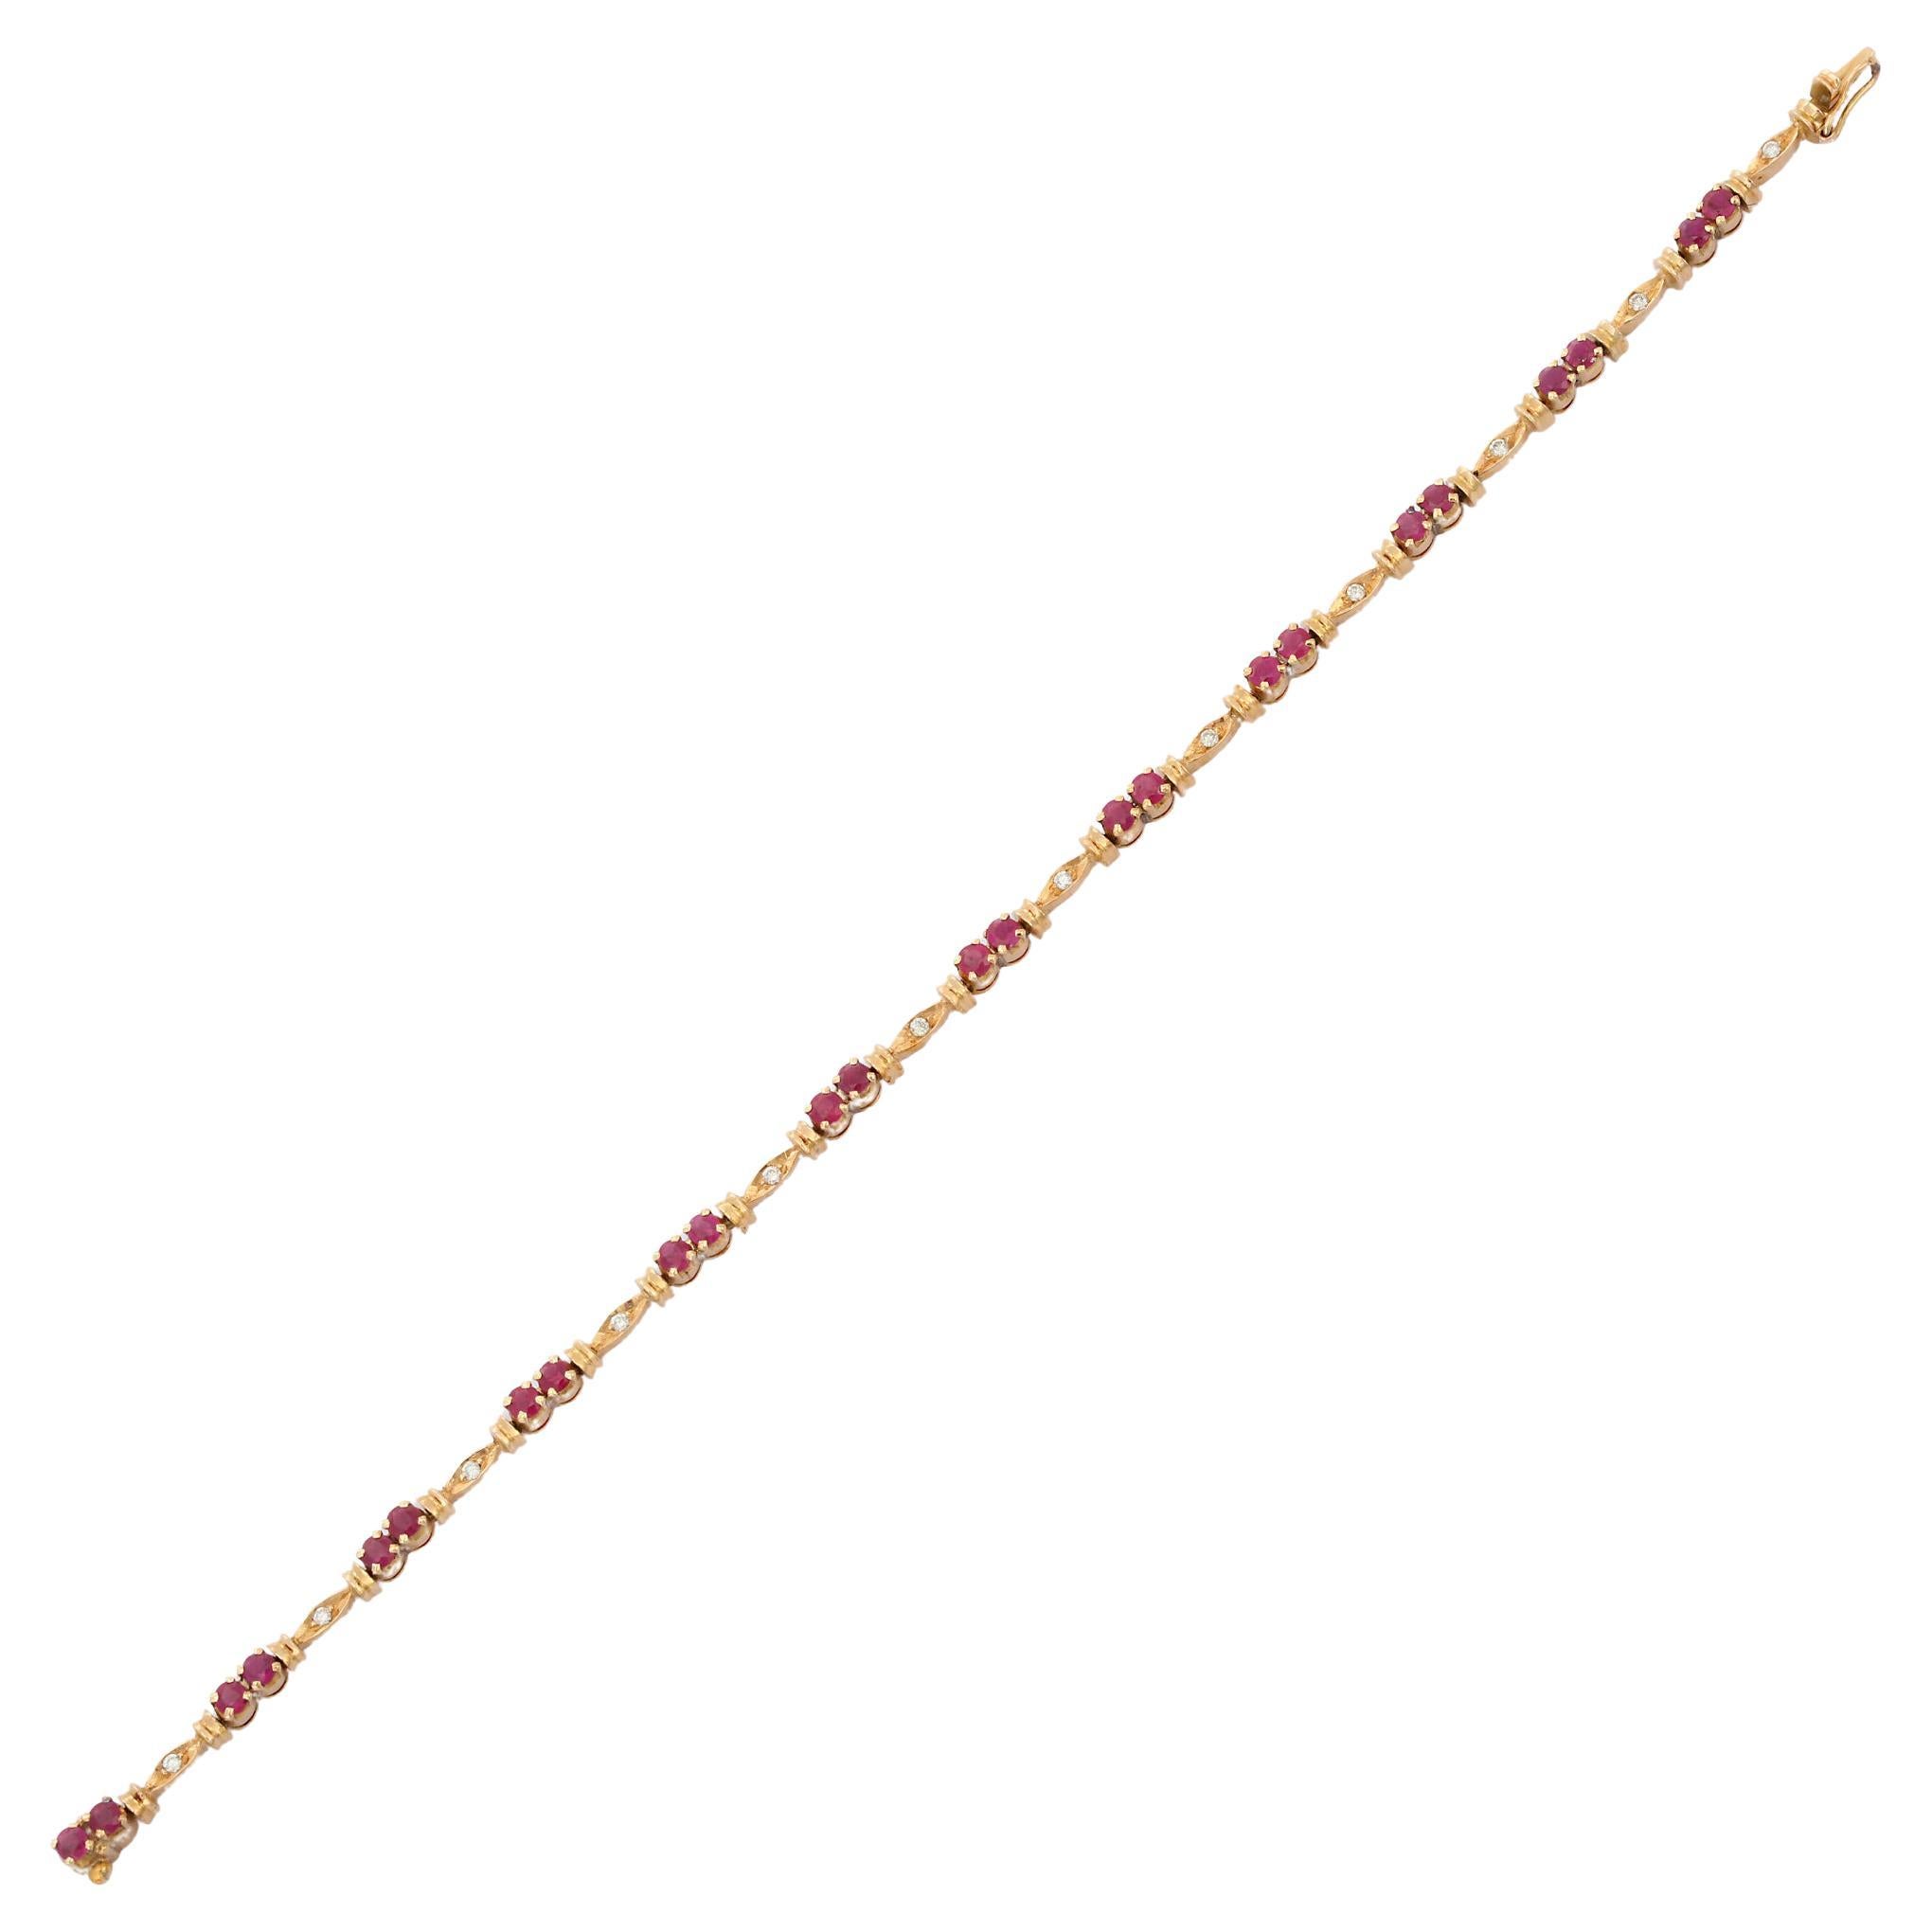 The wearing of charms may have begun as a form of amulet or talisman to ward off evil spirits or bad luck.
This ruby bracelet has a round cut gemstone and diamonds in 18K Gold. A perfect piece of jewelry to adorn your jewelry section.

PRODUCT